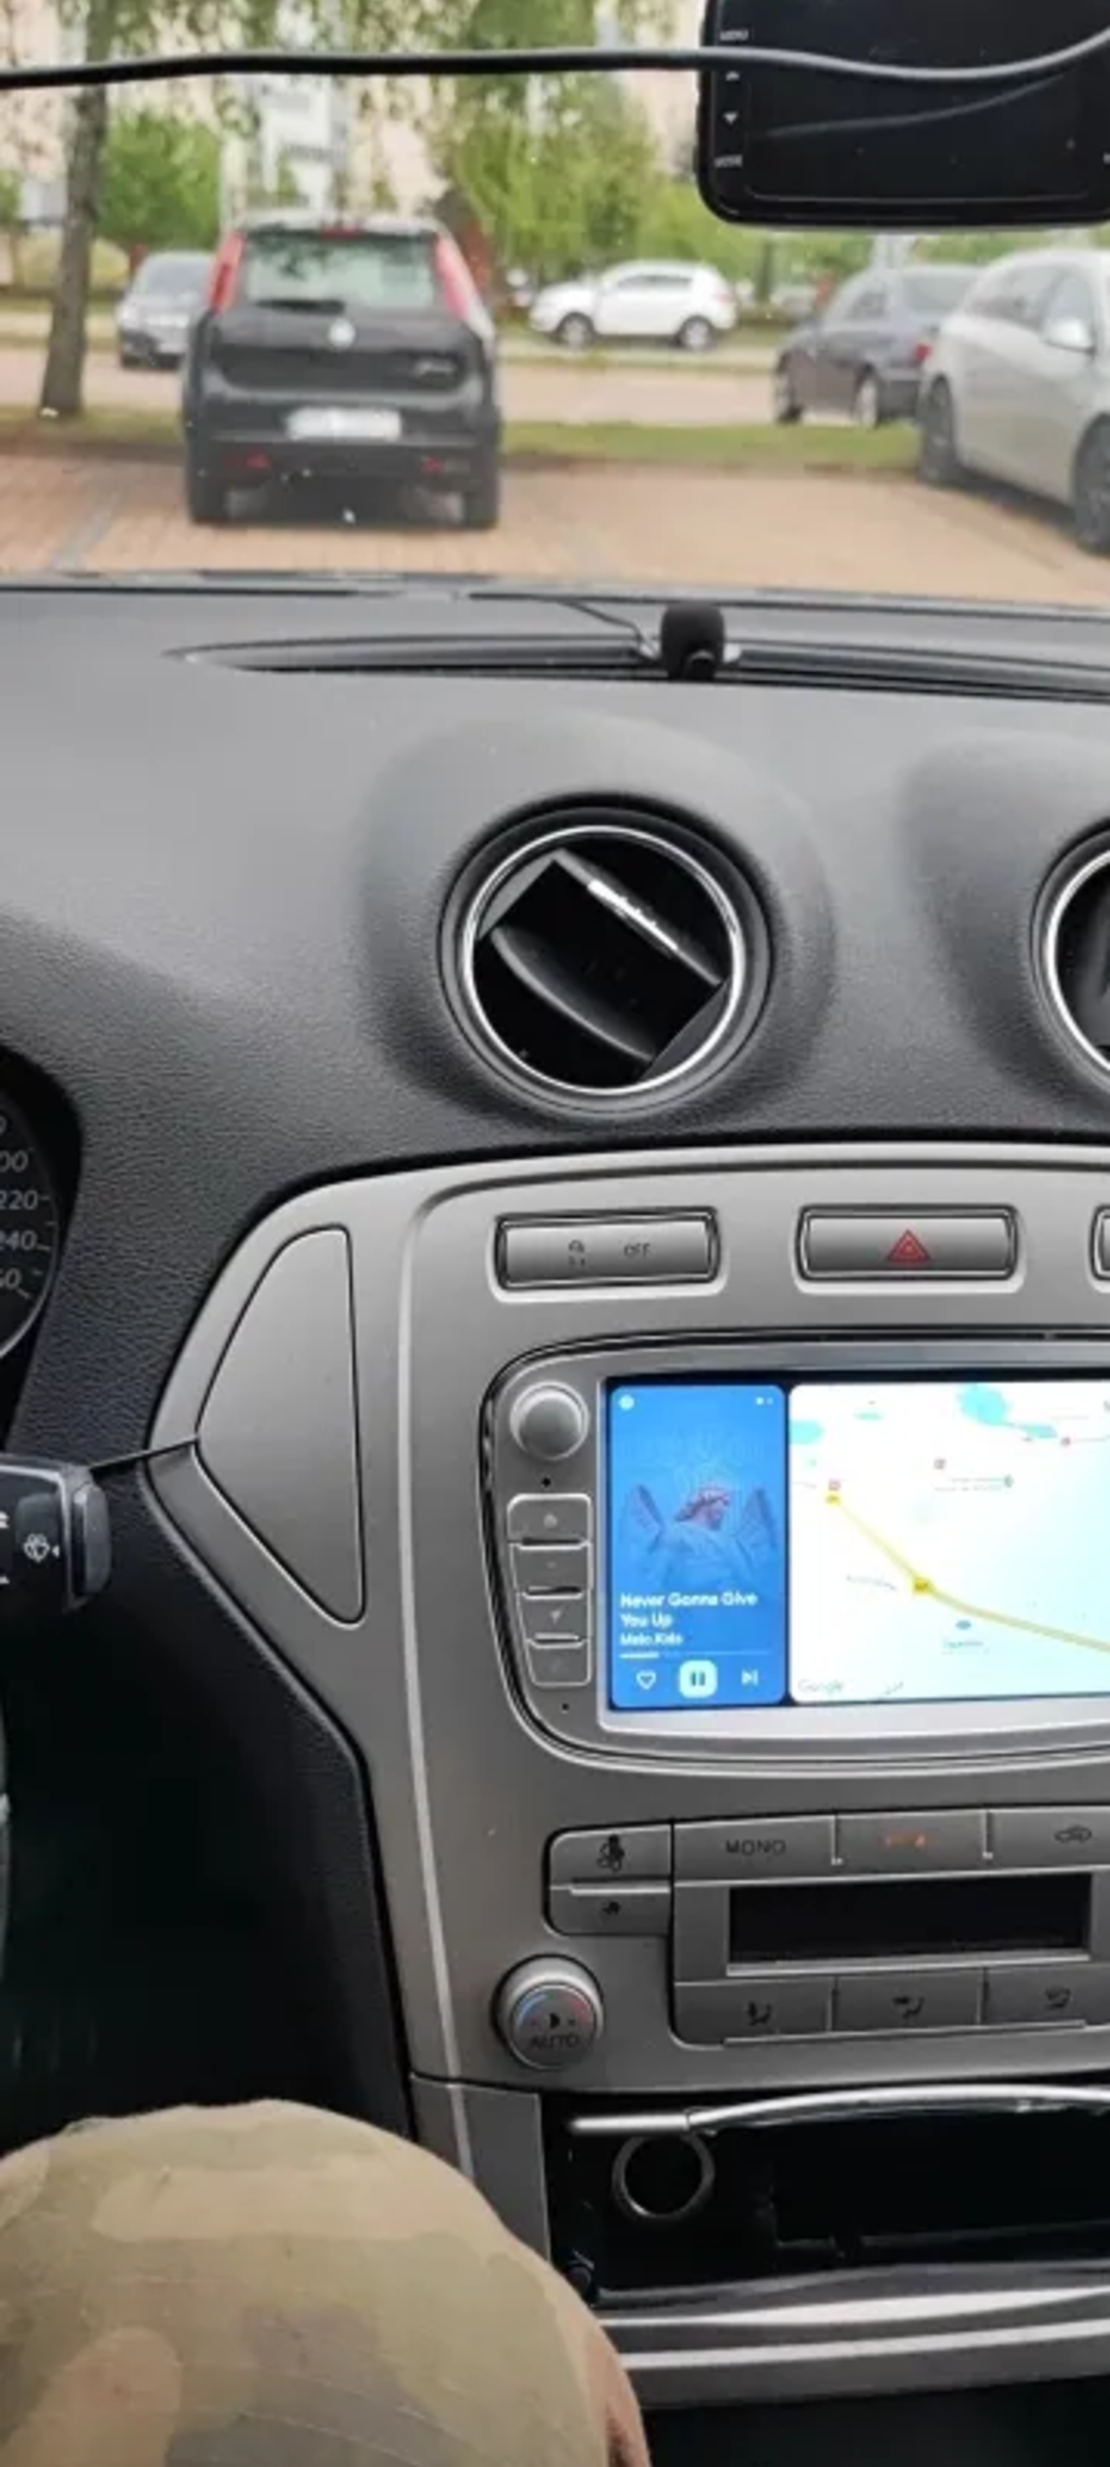 Ford/Mondeo/Focus/S-Max Android Multimedia/Navigation